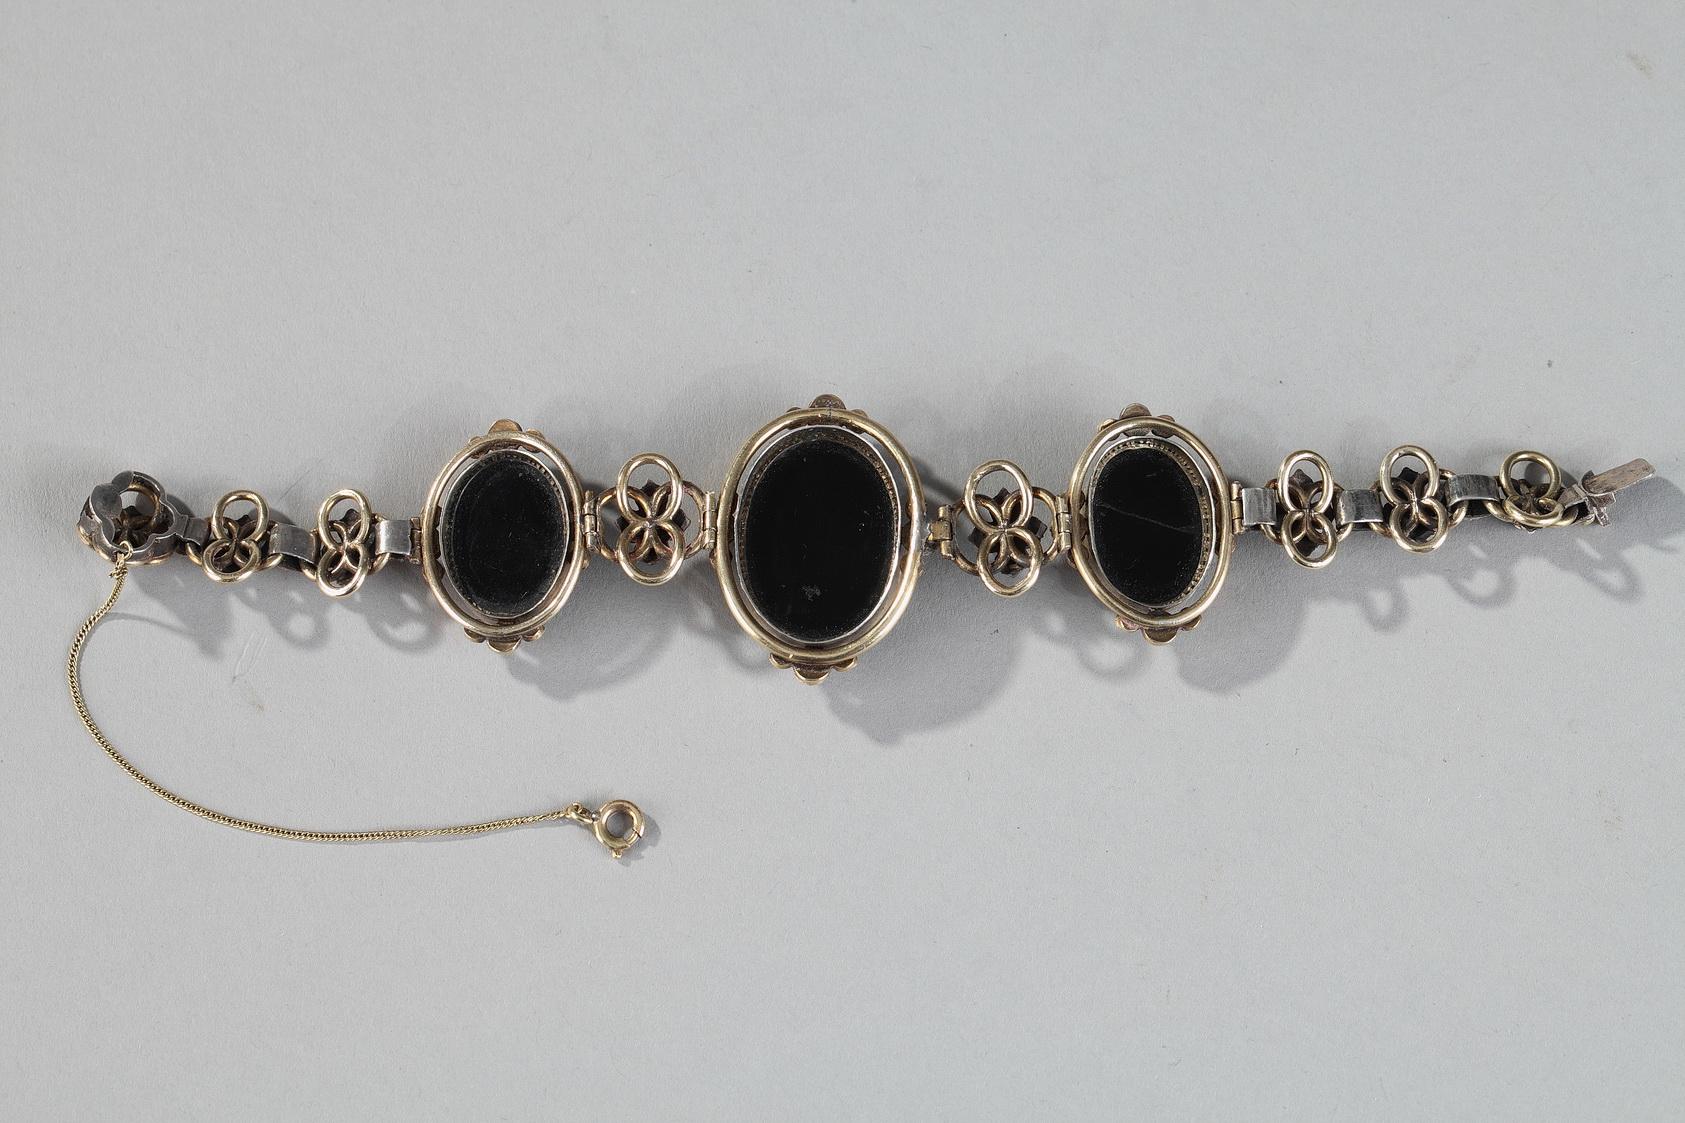 19th Century Silver-Gilt Bracelet with Micromosaic Medallions For Sale 3